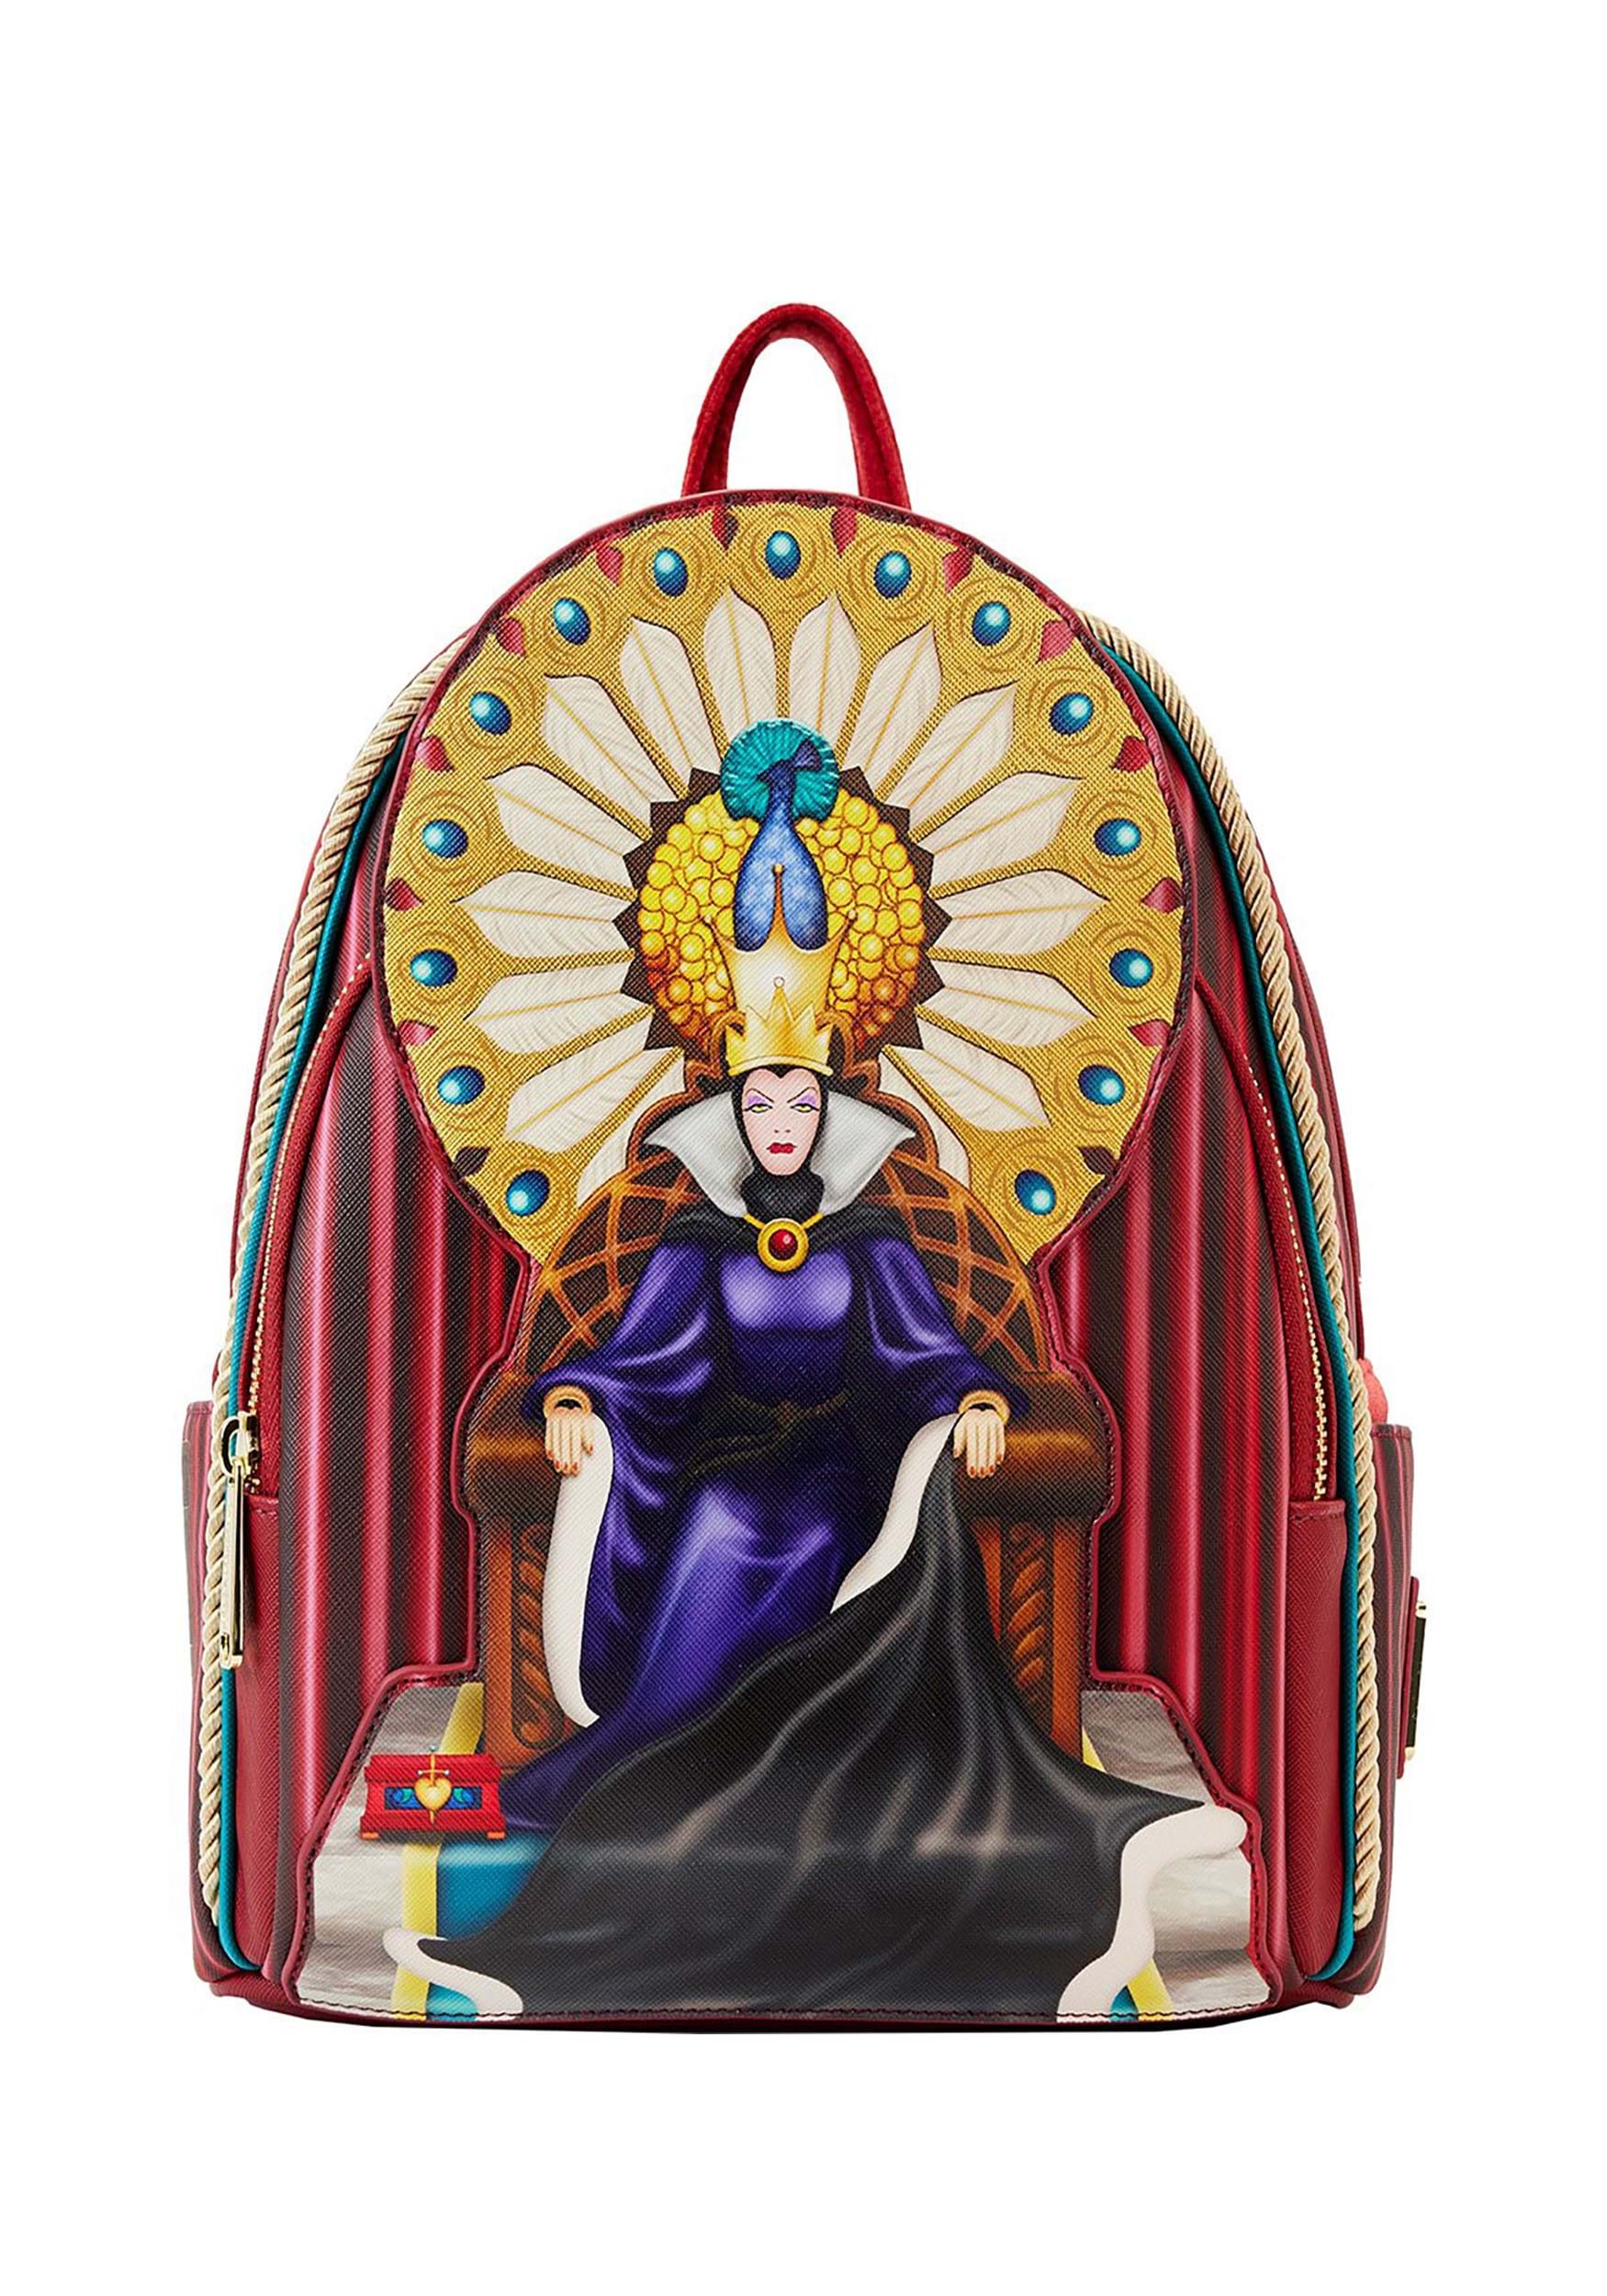 Disney Snow White Evil Queen Throne Mini Backpack by Loungefly